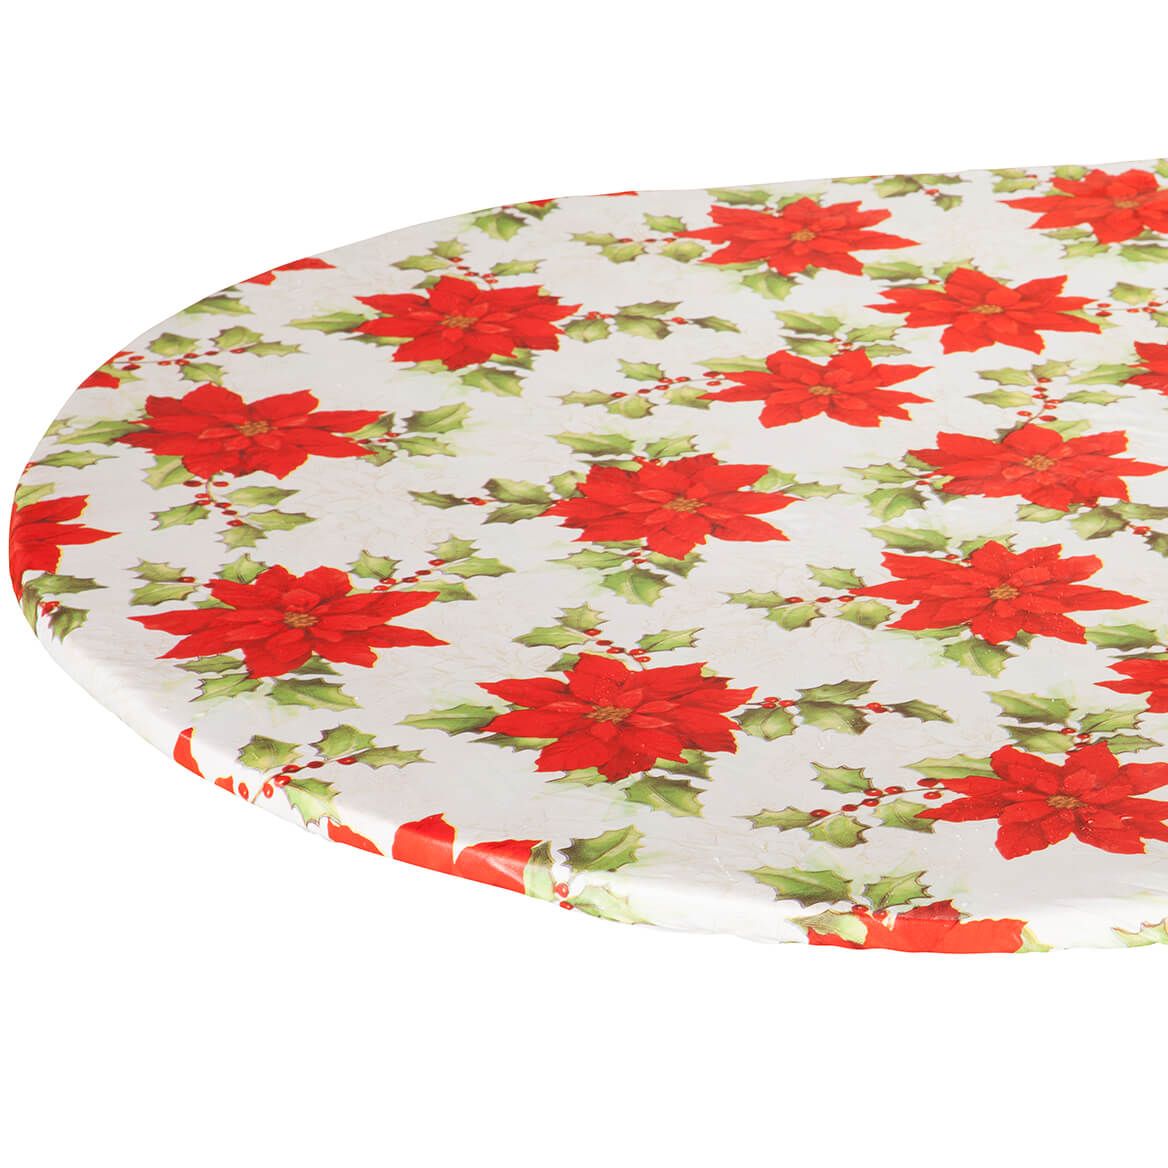 Poinsettia Elasticized Vinyl Tablecover by Chef's Pride + '-' + 368337